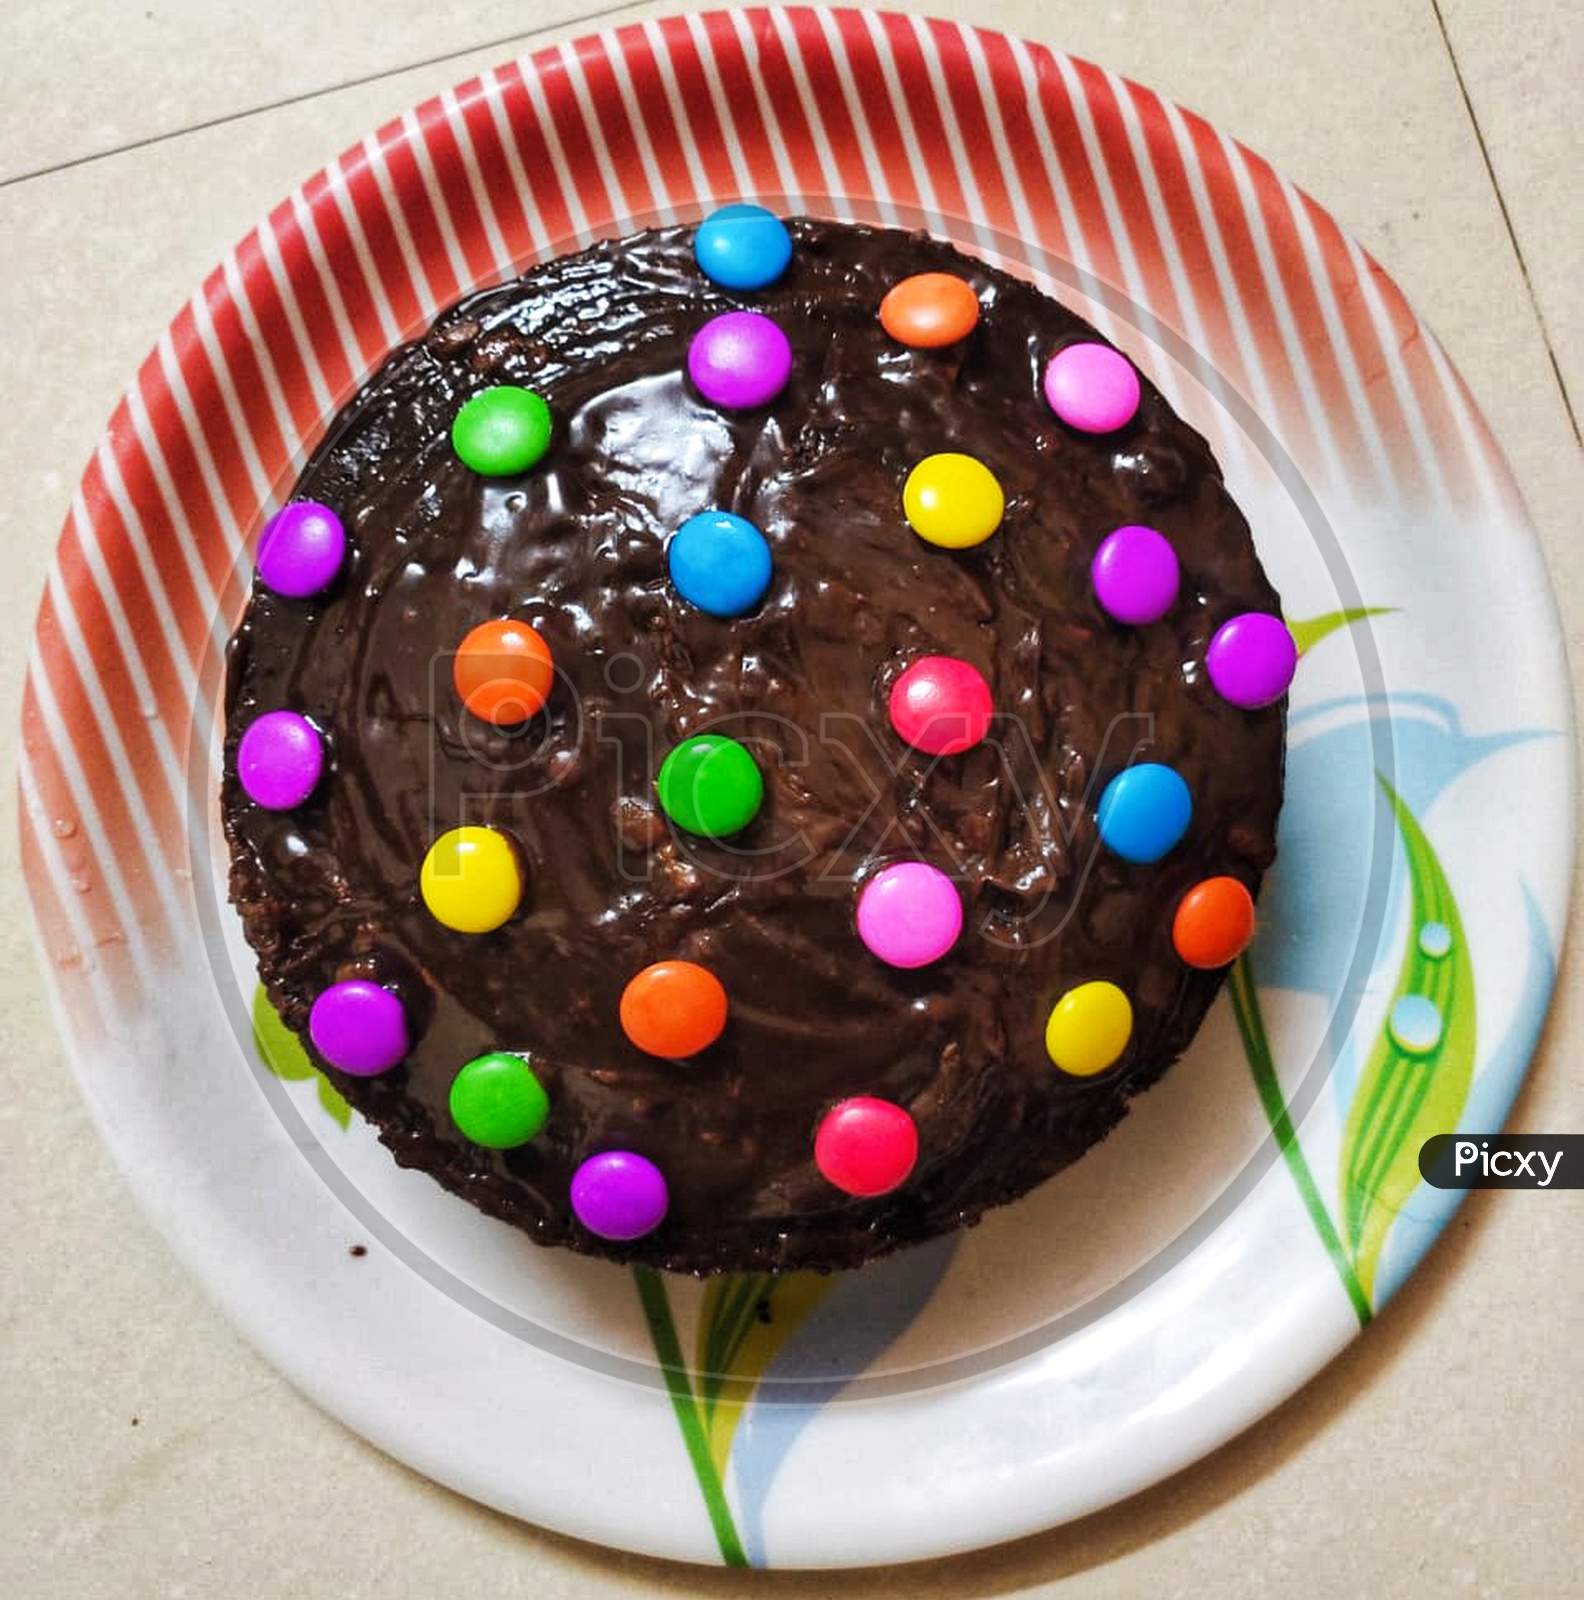 Know the best tips for making a chocolate cake at home - CakenGifts.in